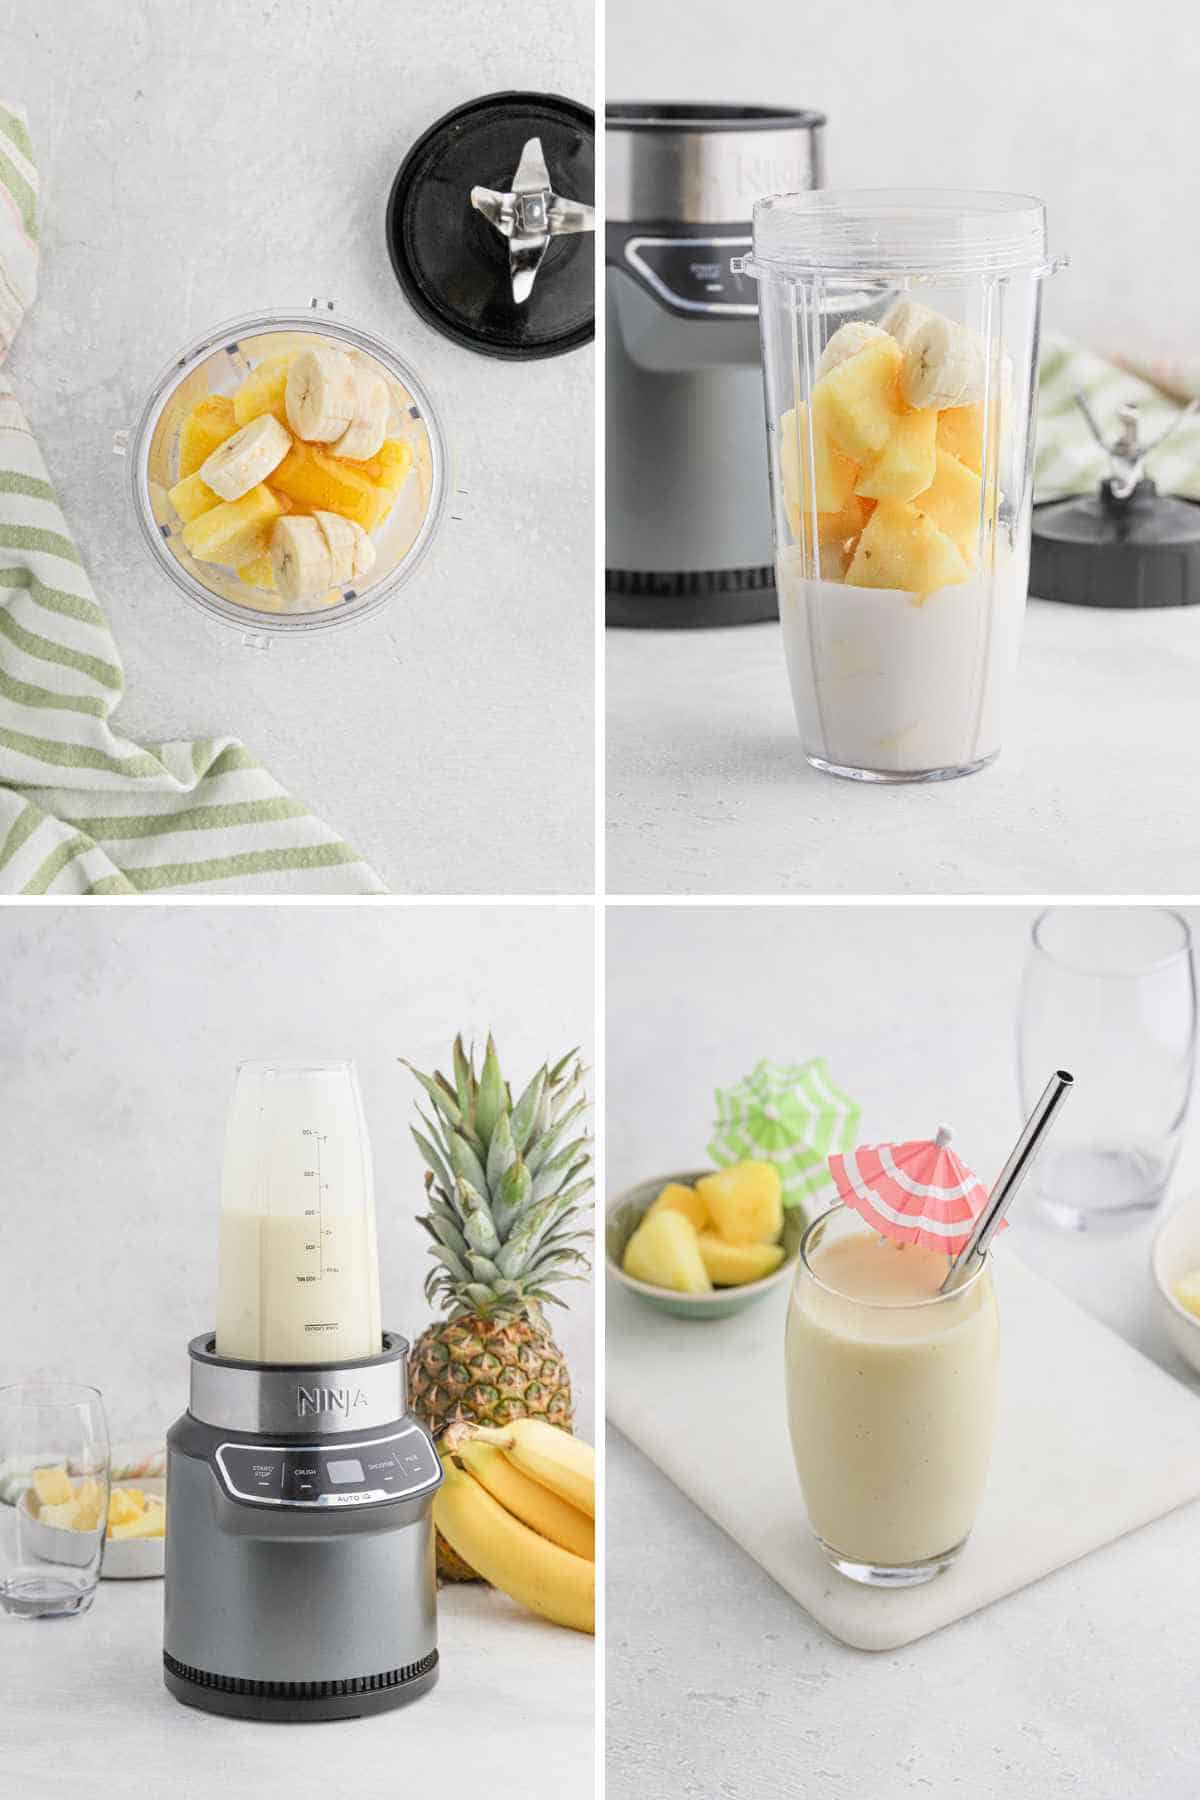 A picture collage showing the main steps in making a pineapple smoothie.